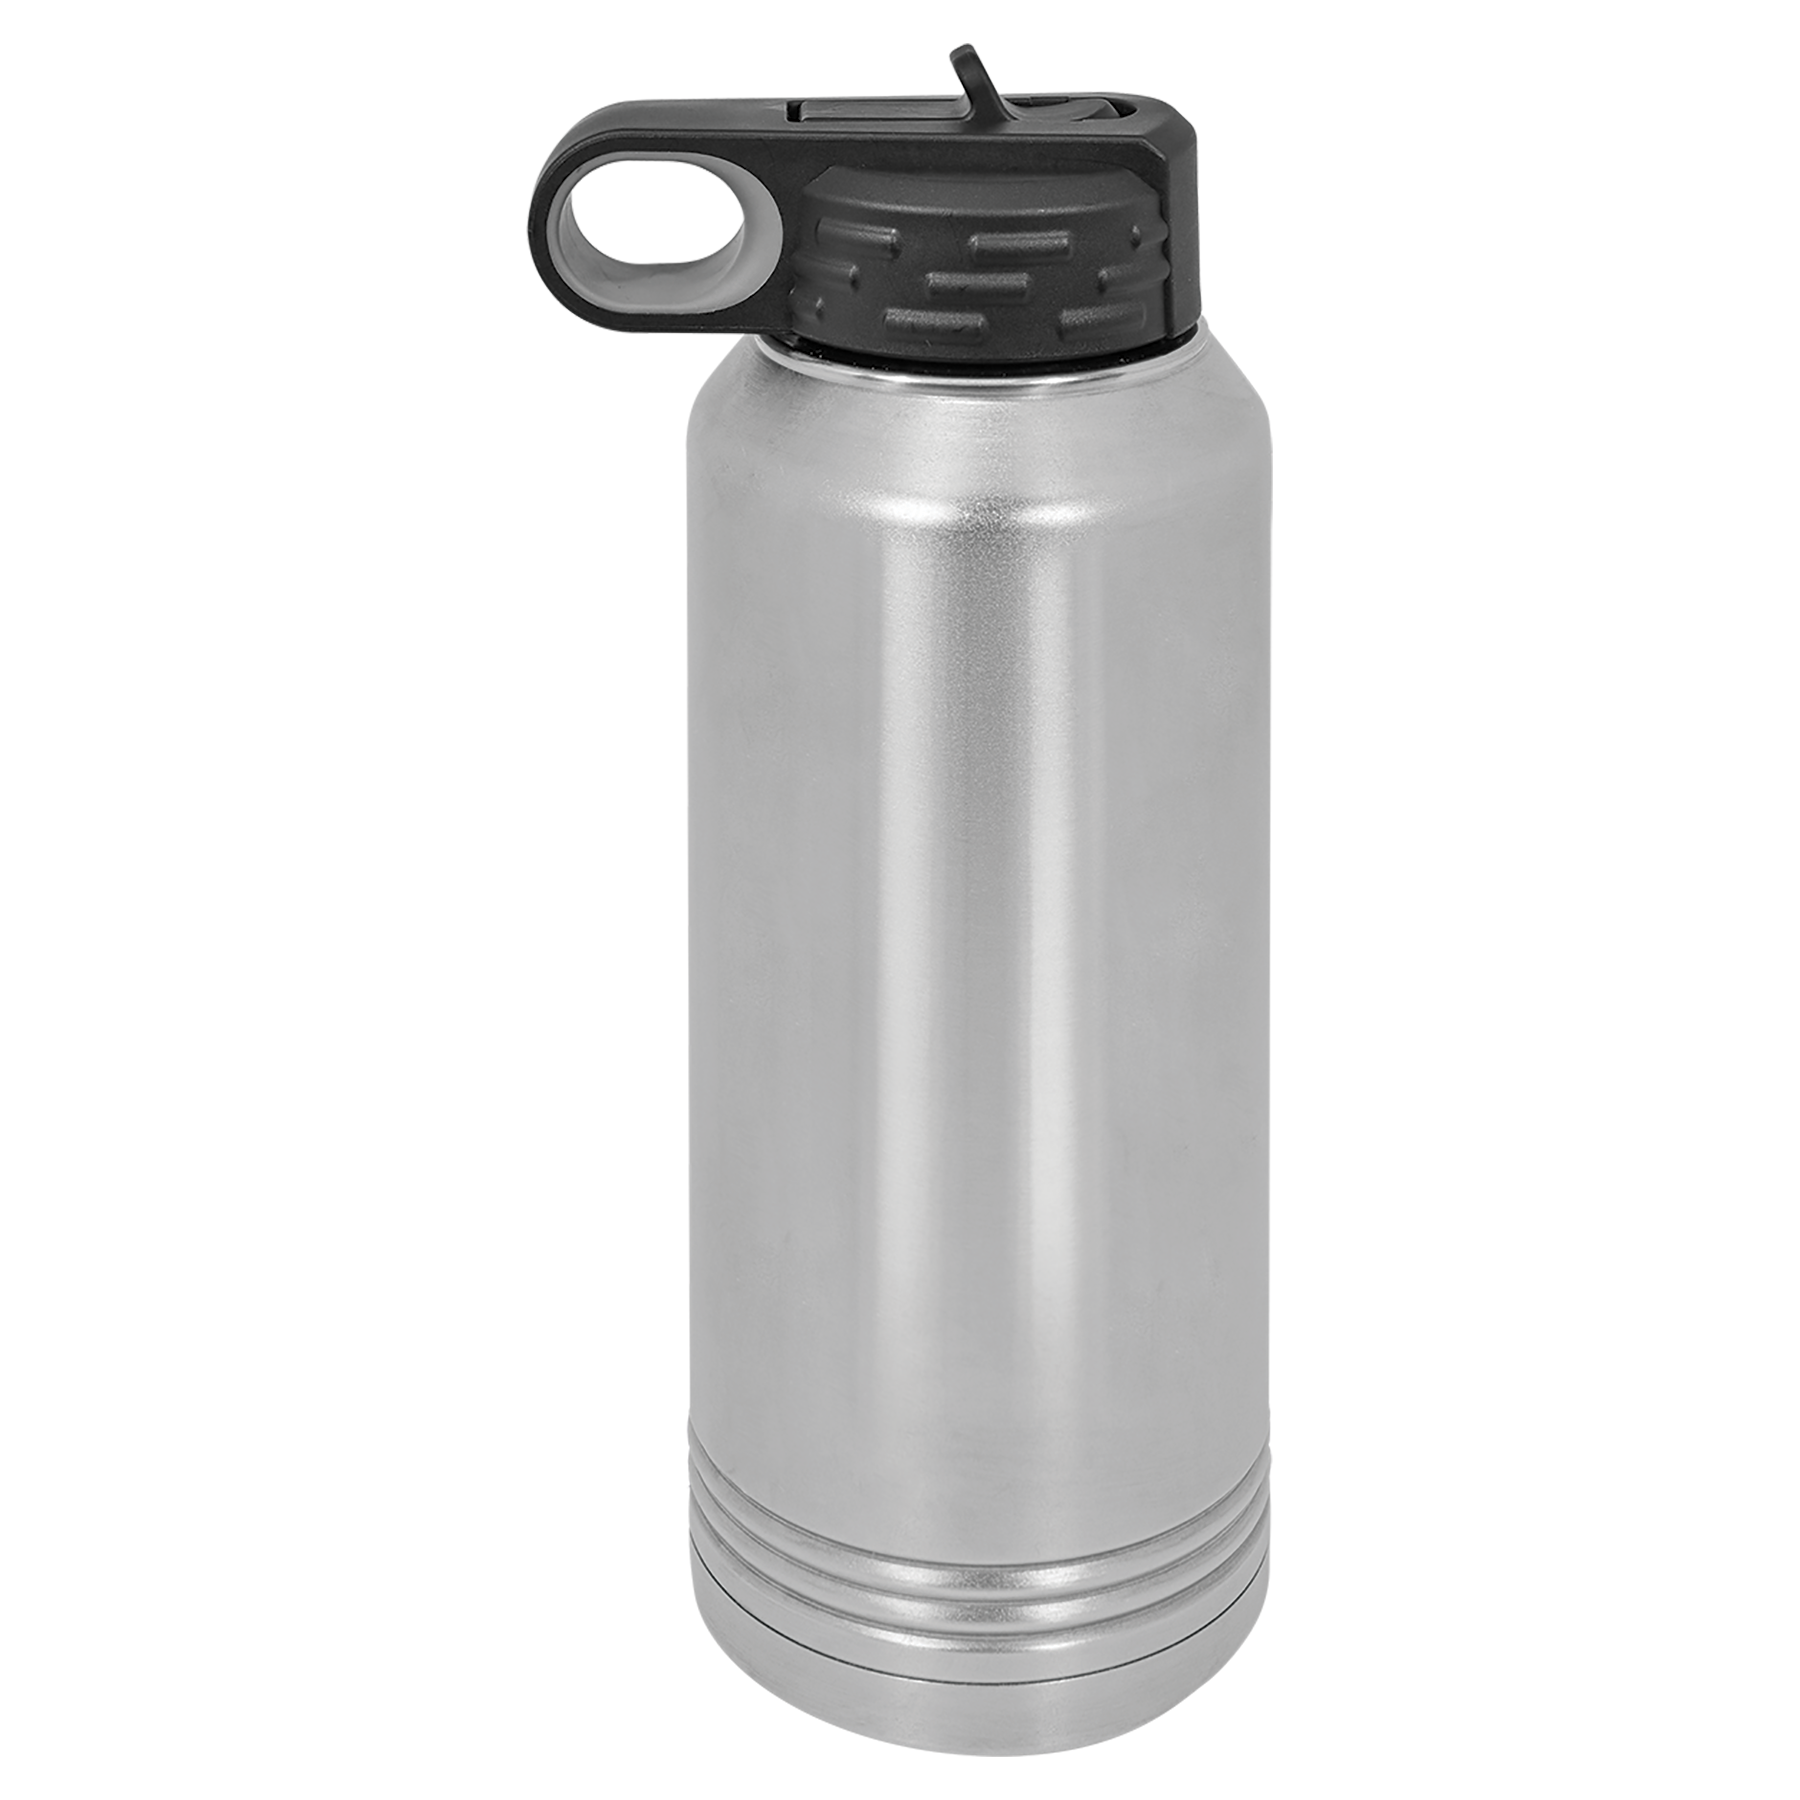 Stainless Steel 32oz Water Bottle -One Free Engraving   -Double-wall Vacuum Insulated  -Made from 18/8 Gauge Stainless Steel (Type 304 Food Grade)  -Lid is BPA Free (Hand Wash Only)  -Not recommended for Dishwasher  -Works with Cold and Hot Drinks  -18 Color Options  -Perfect for Personalized Gifts, Awards, Incentives, Swag & Fundraisers